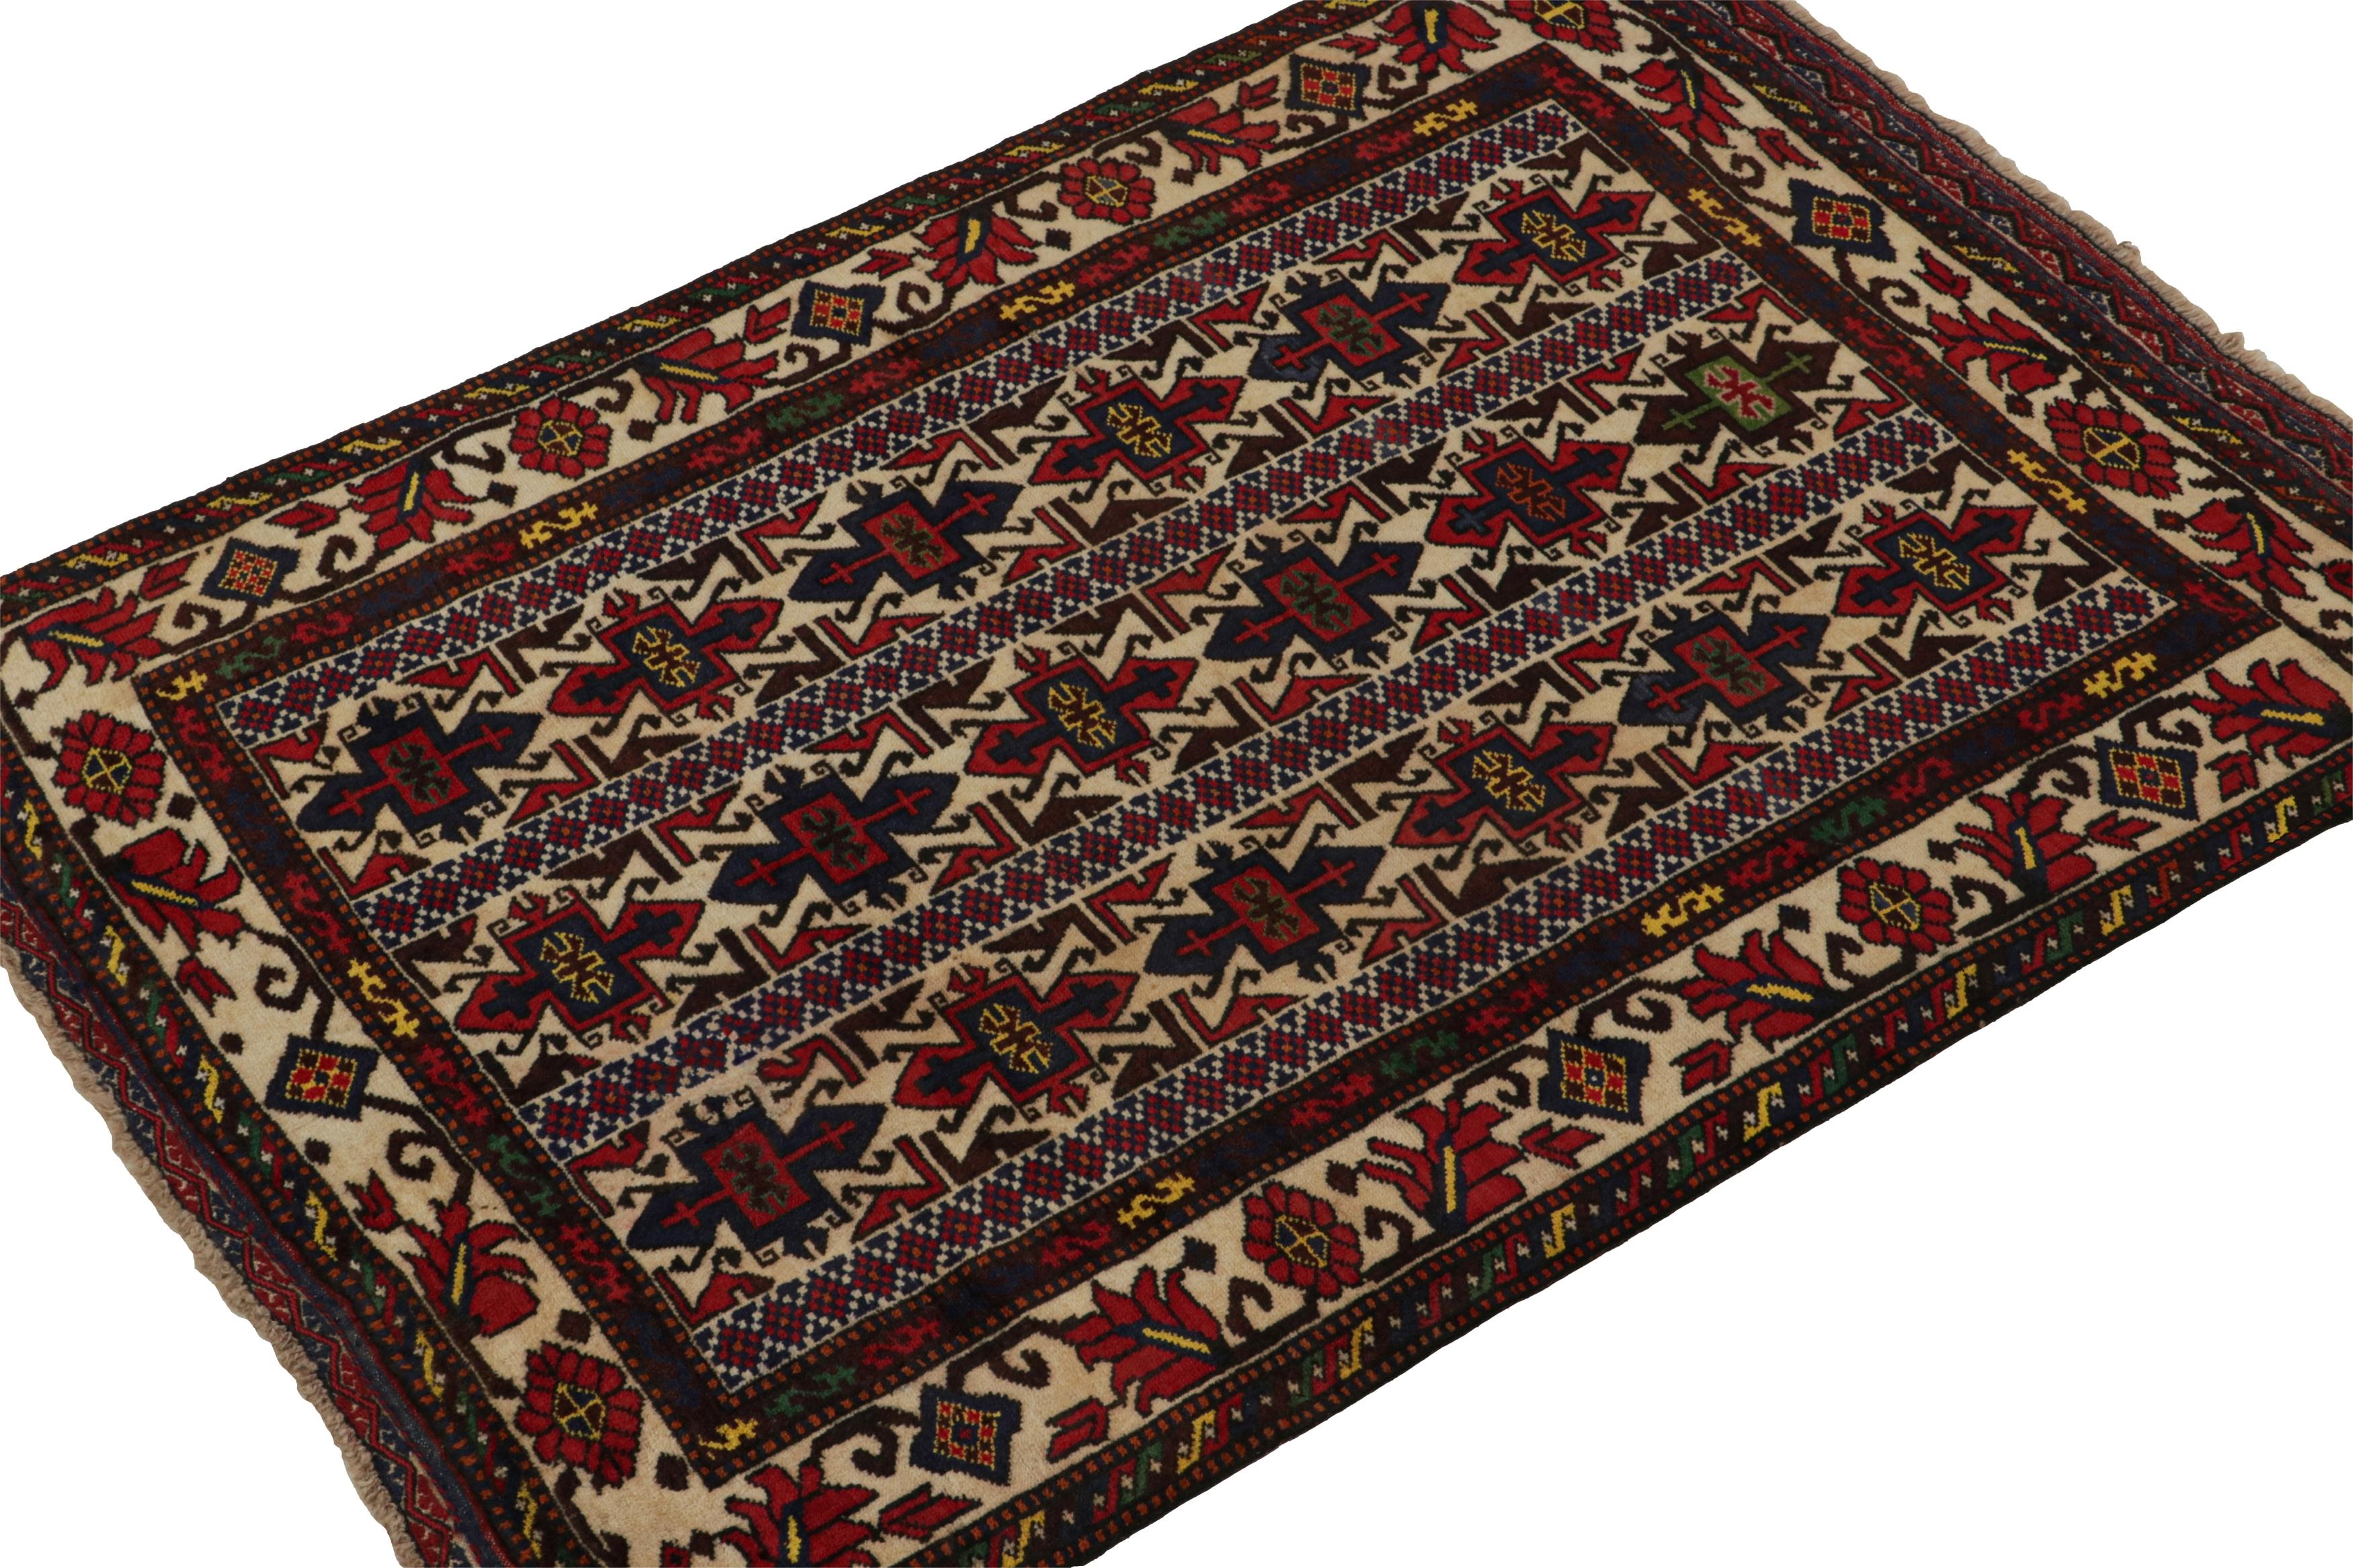 Hand-knotted in wool, this 4x6 Baluch Persian rug of the 1950s is the latest to enter Rug & Kilim’s Antique & Vintage collection.

On the Design:

The piece carries tribal patterns in vertical columns alternating in red, beige, blue & brown. The